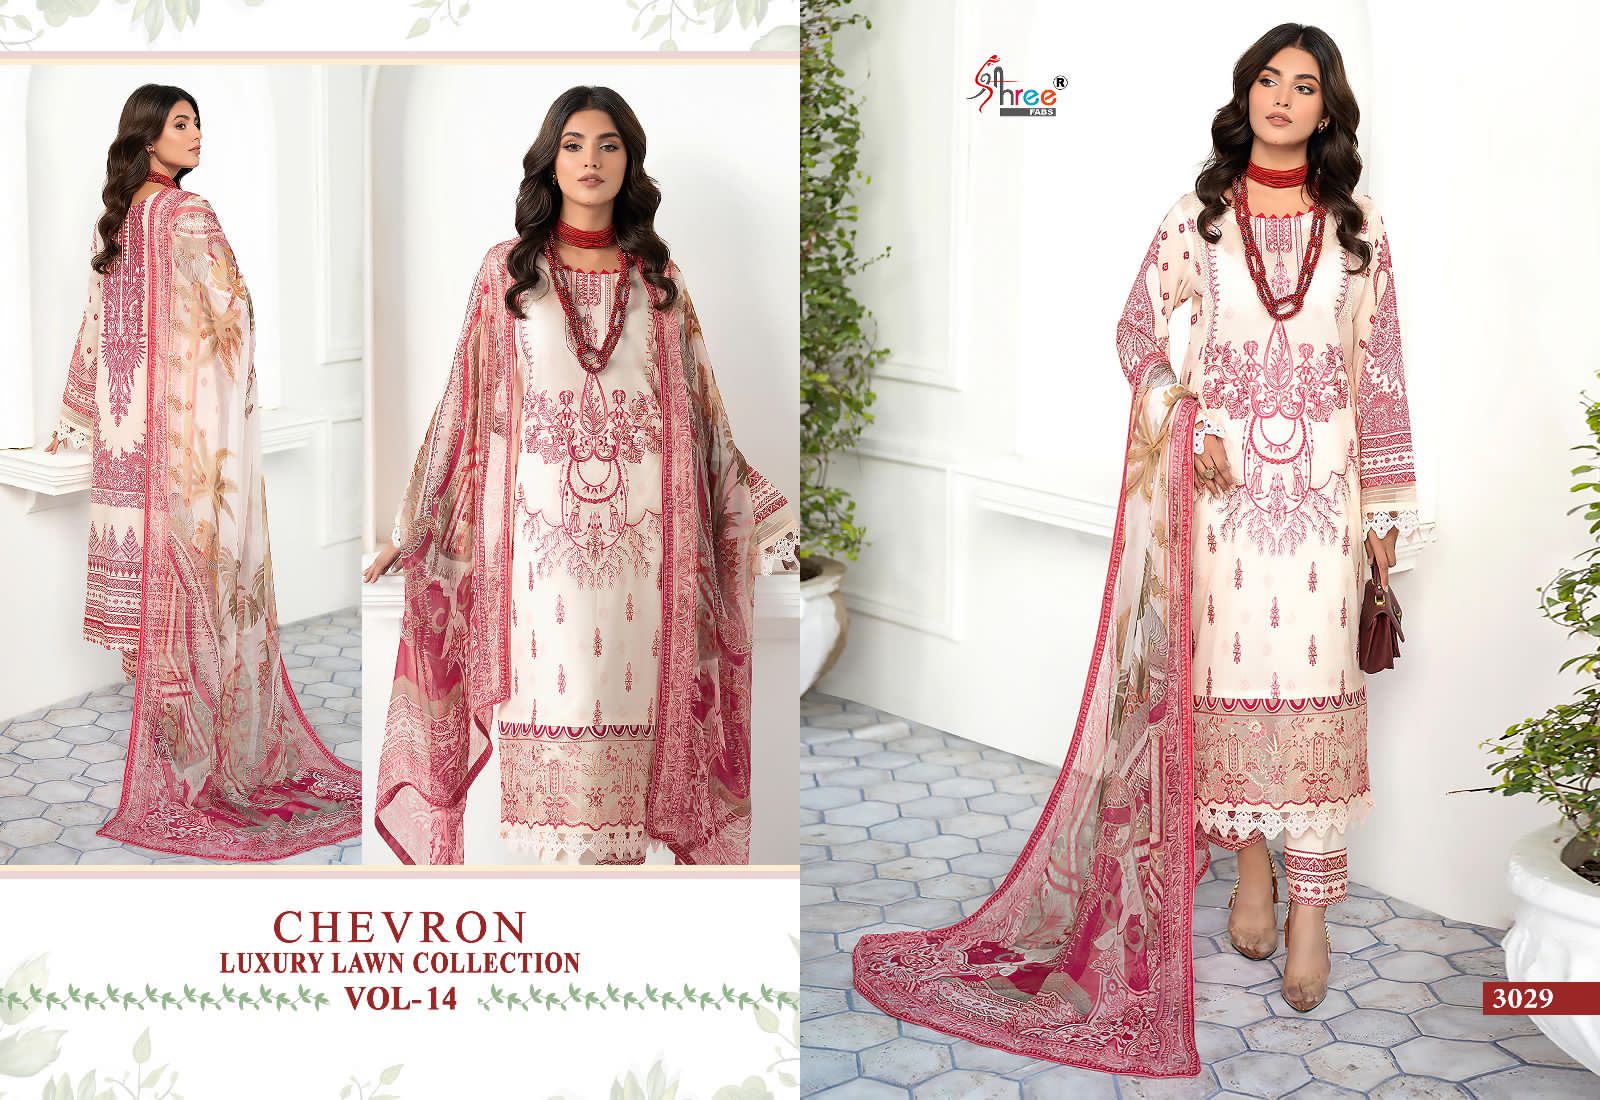 Shree Chevron Luxury Lawn Collection Vol 14 collection 8